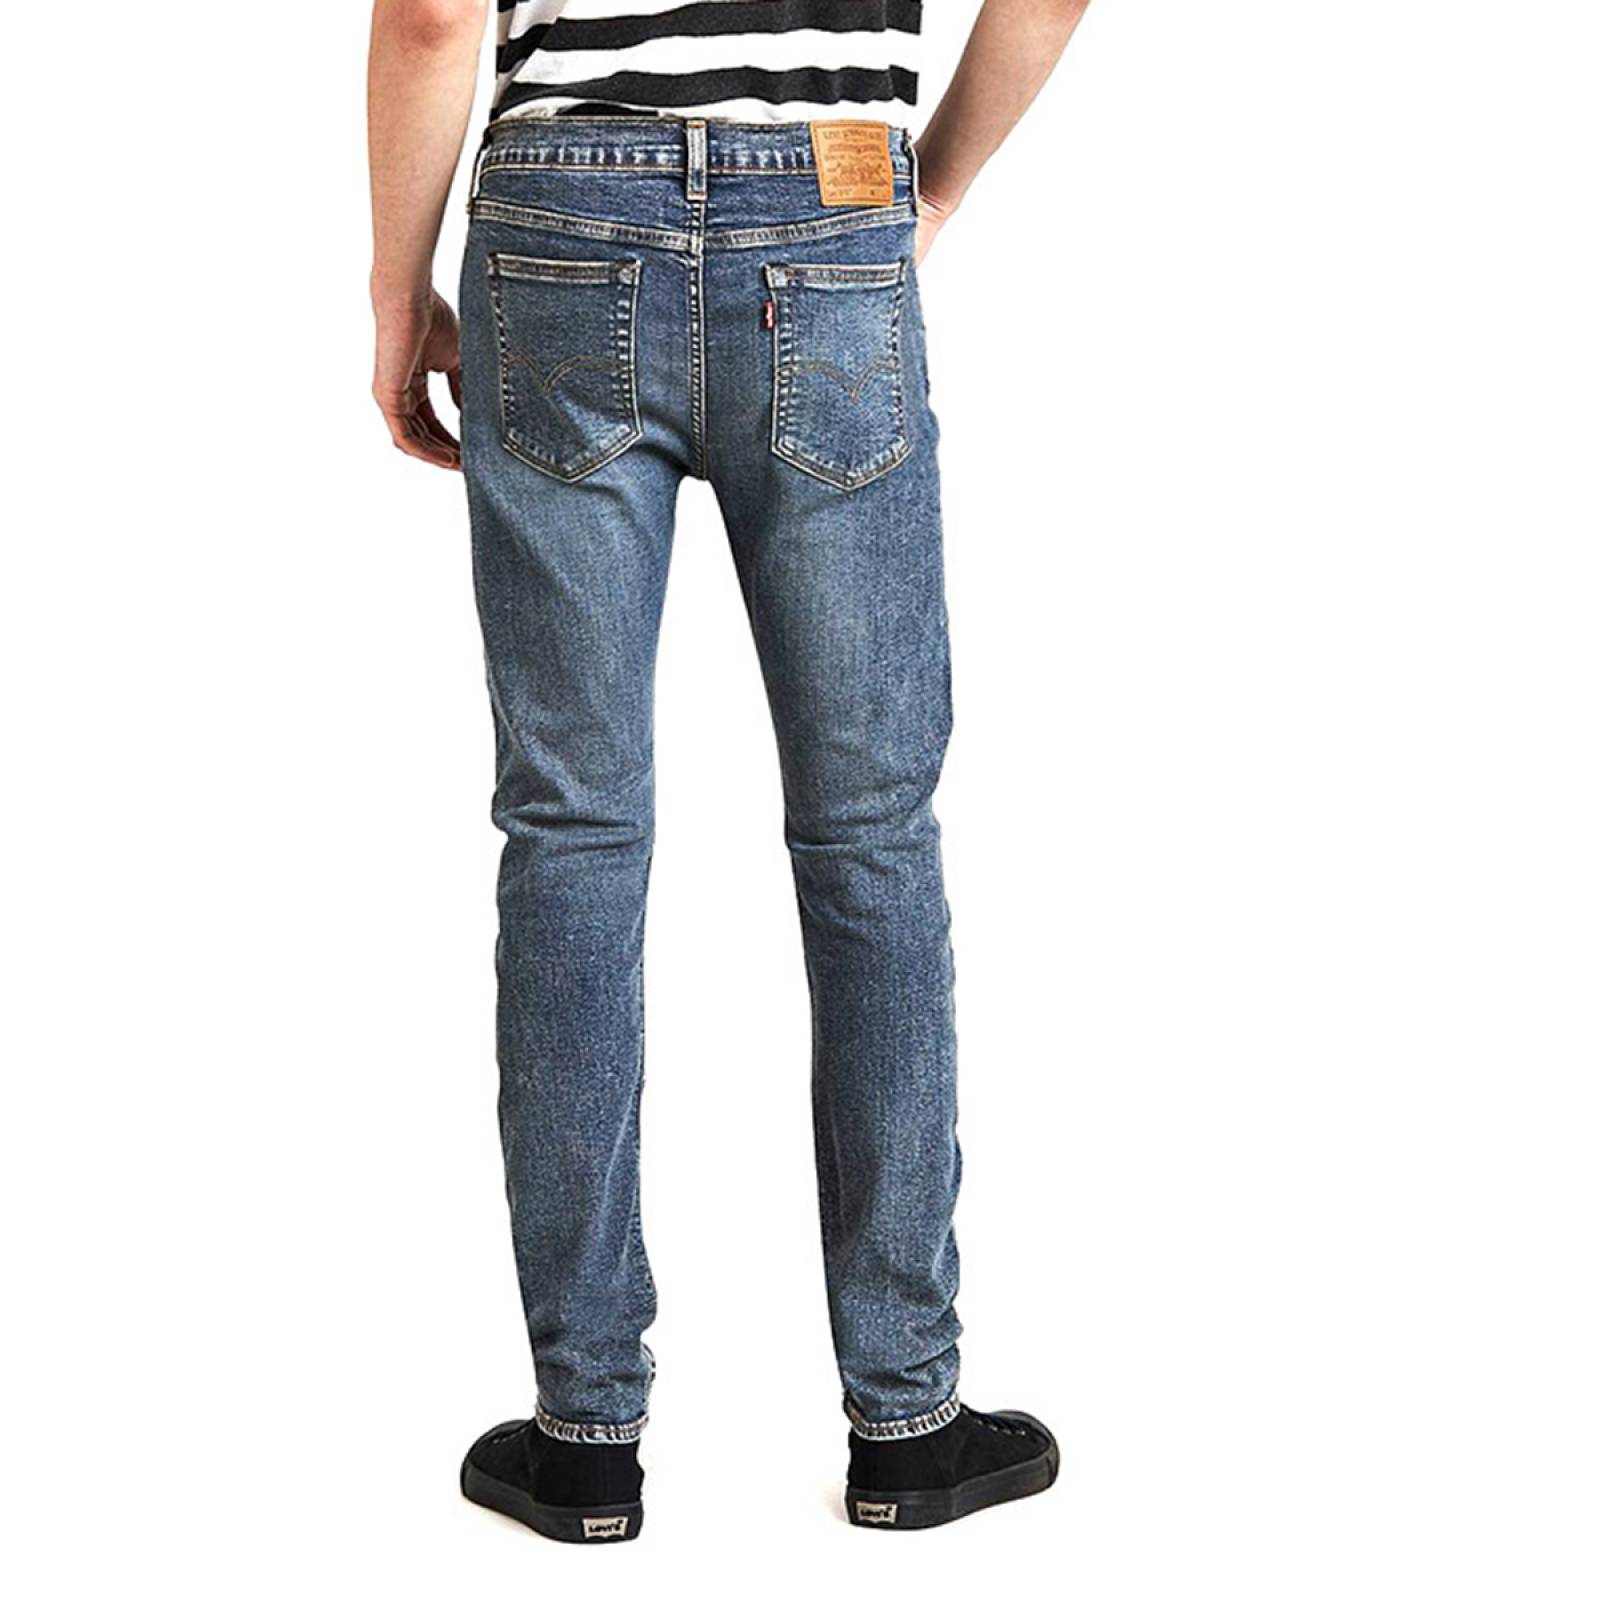 Jeans 519 Extreme Skinny Fit para Caballero